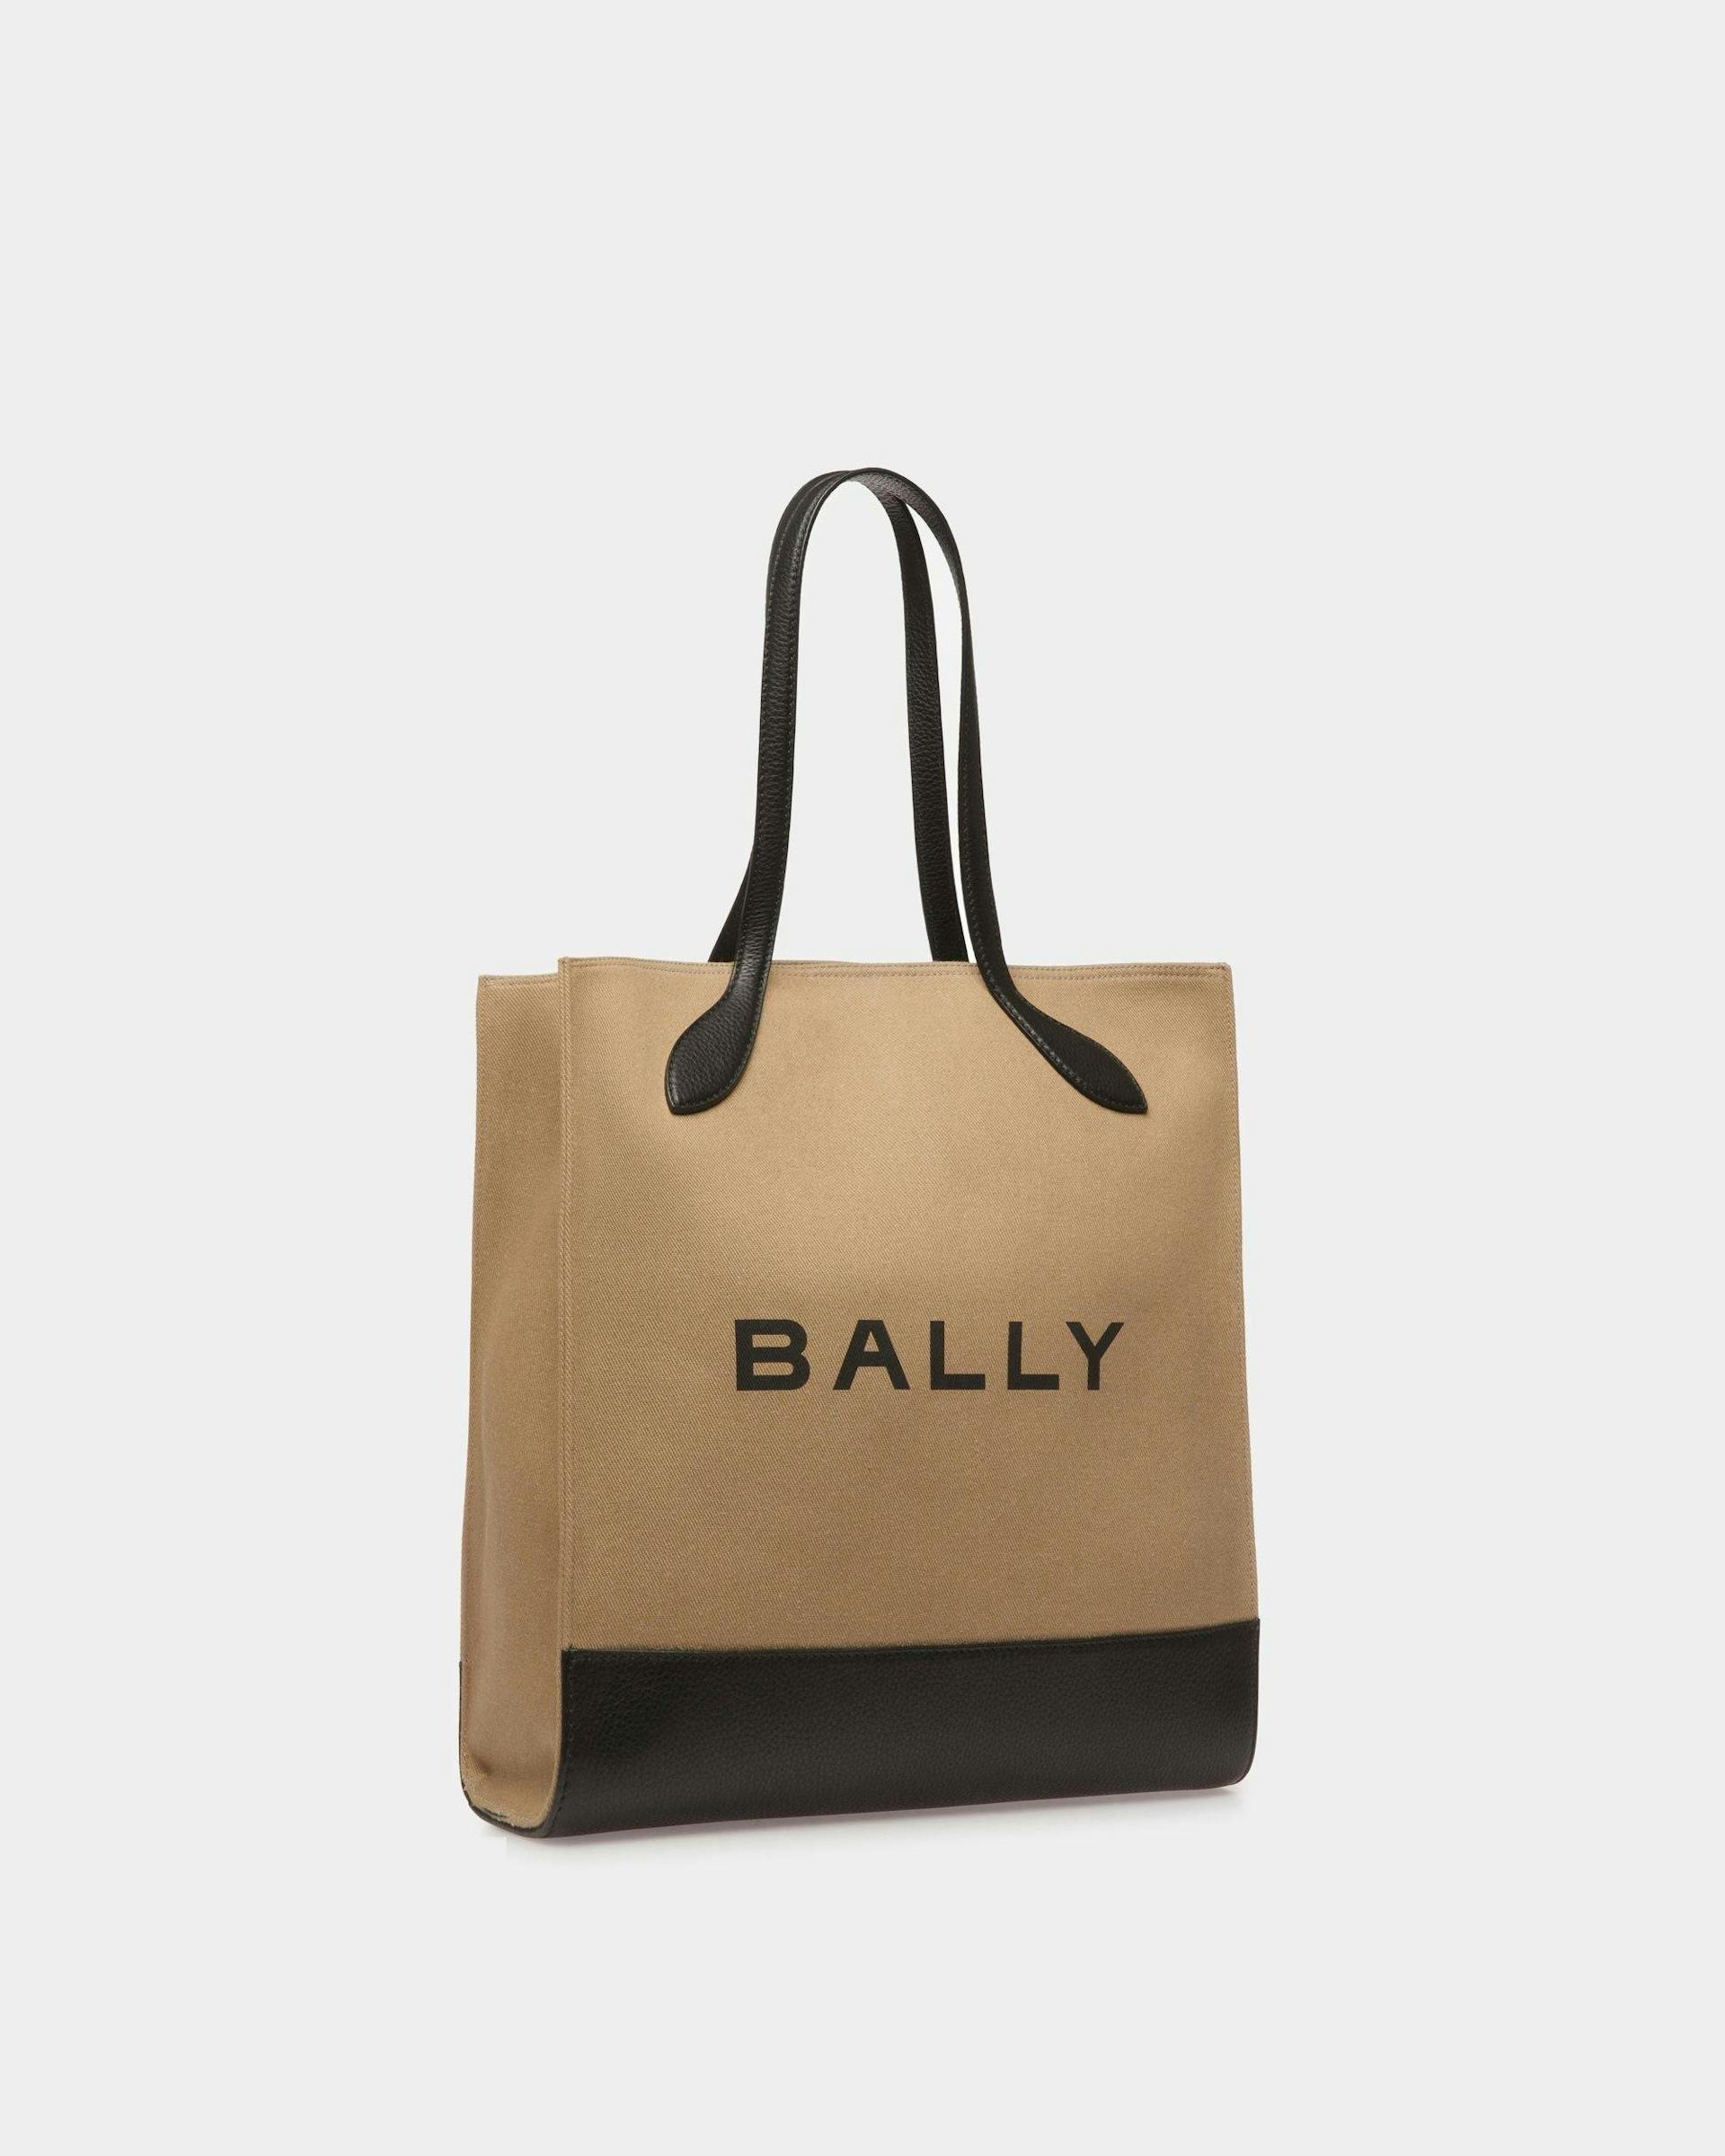 Bar Tote Bag In Sand And Black Fabric - Women's - Bally - 04